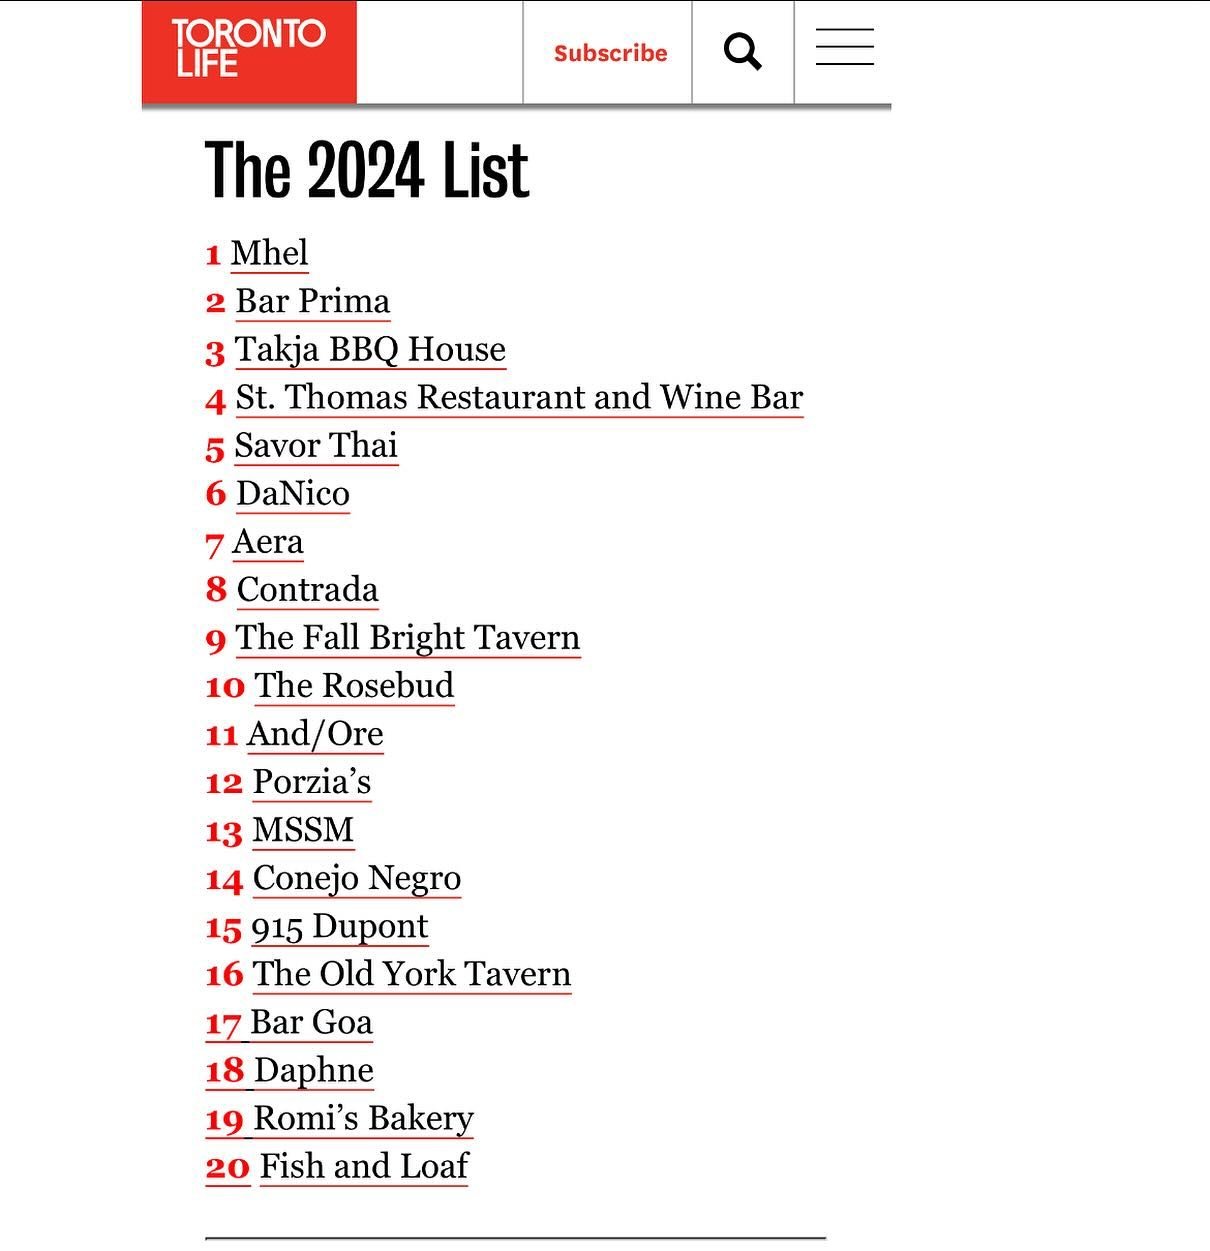 Thanks @torontolife! 

We&rsquo;re both just a little gobsmacked but so very, very proud of what our little team has created. It&rsquo;s been such a joy to pour our heart and souls into this wee little restaurant and create a warm and welcoming space